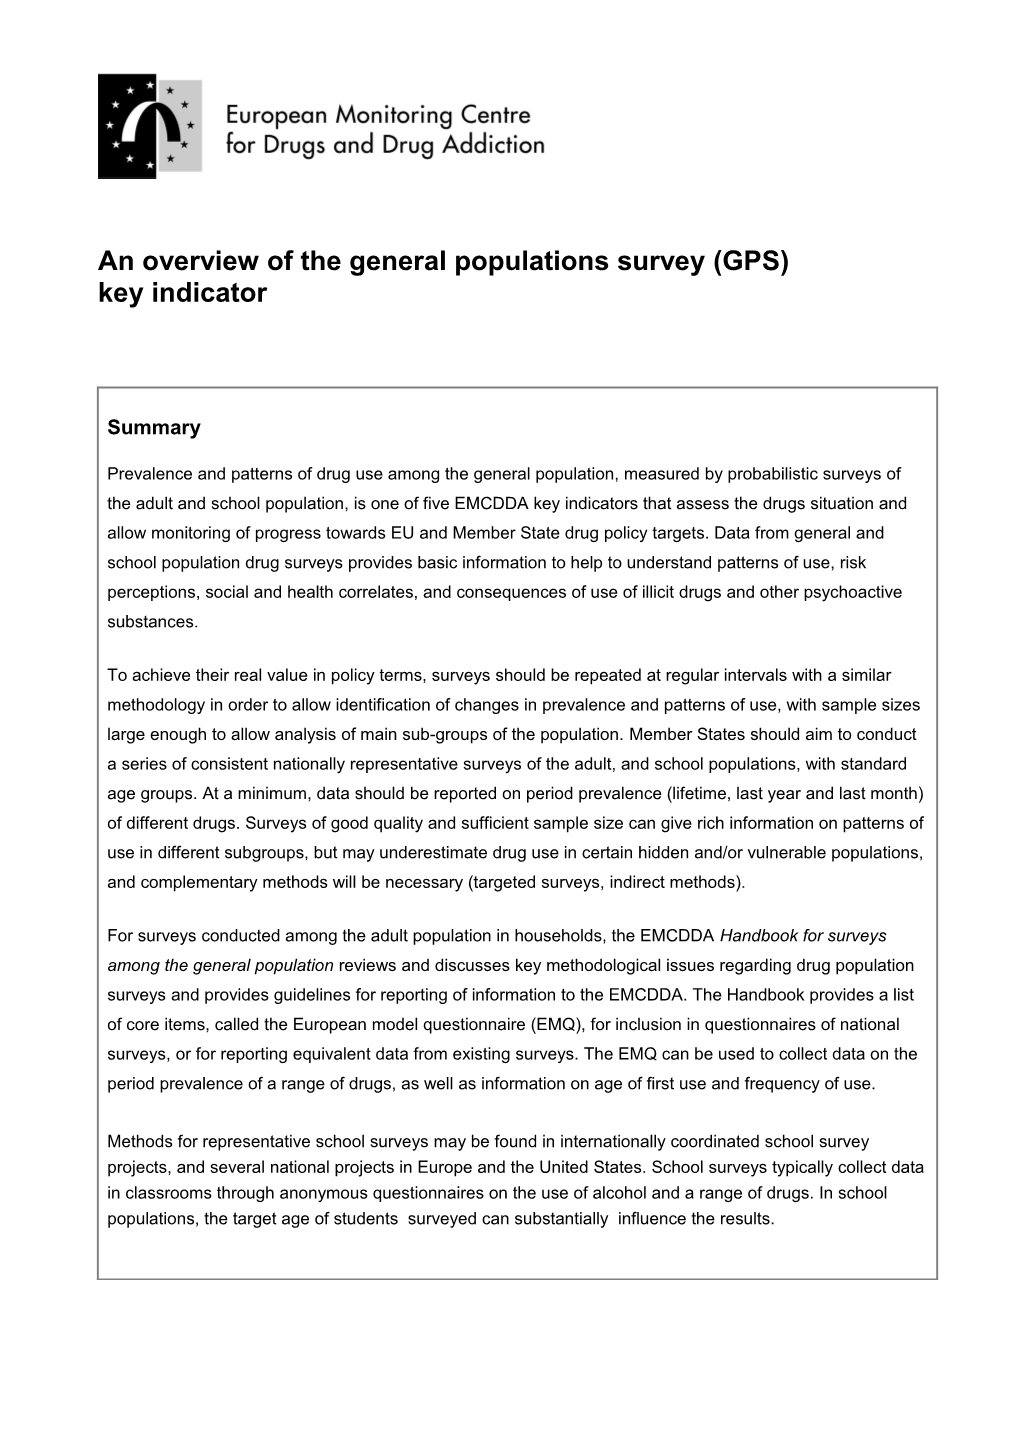 An Overview of the General Populations Survey (GPS) Key Indicator